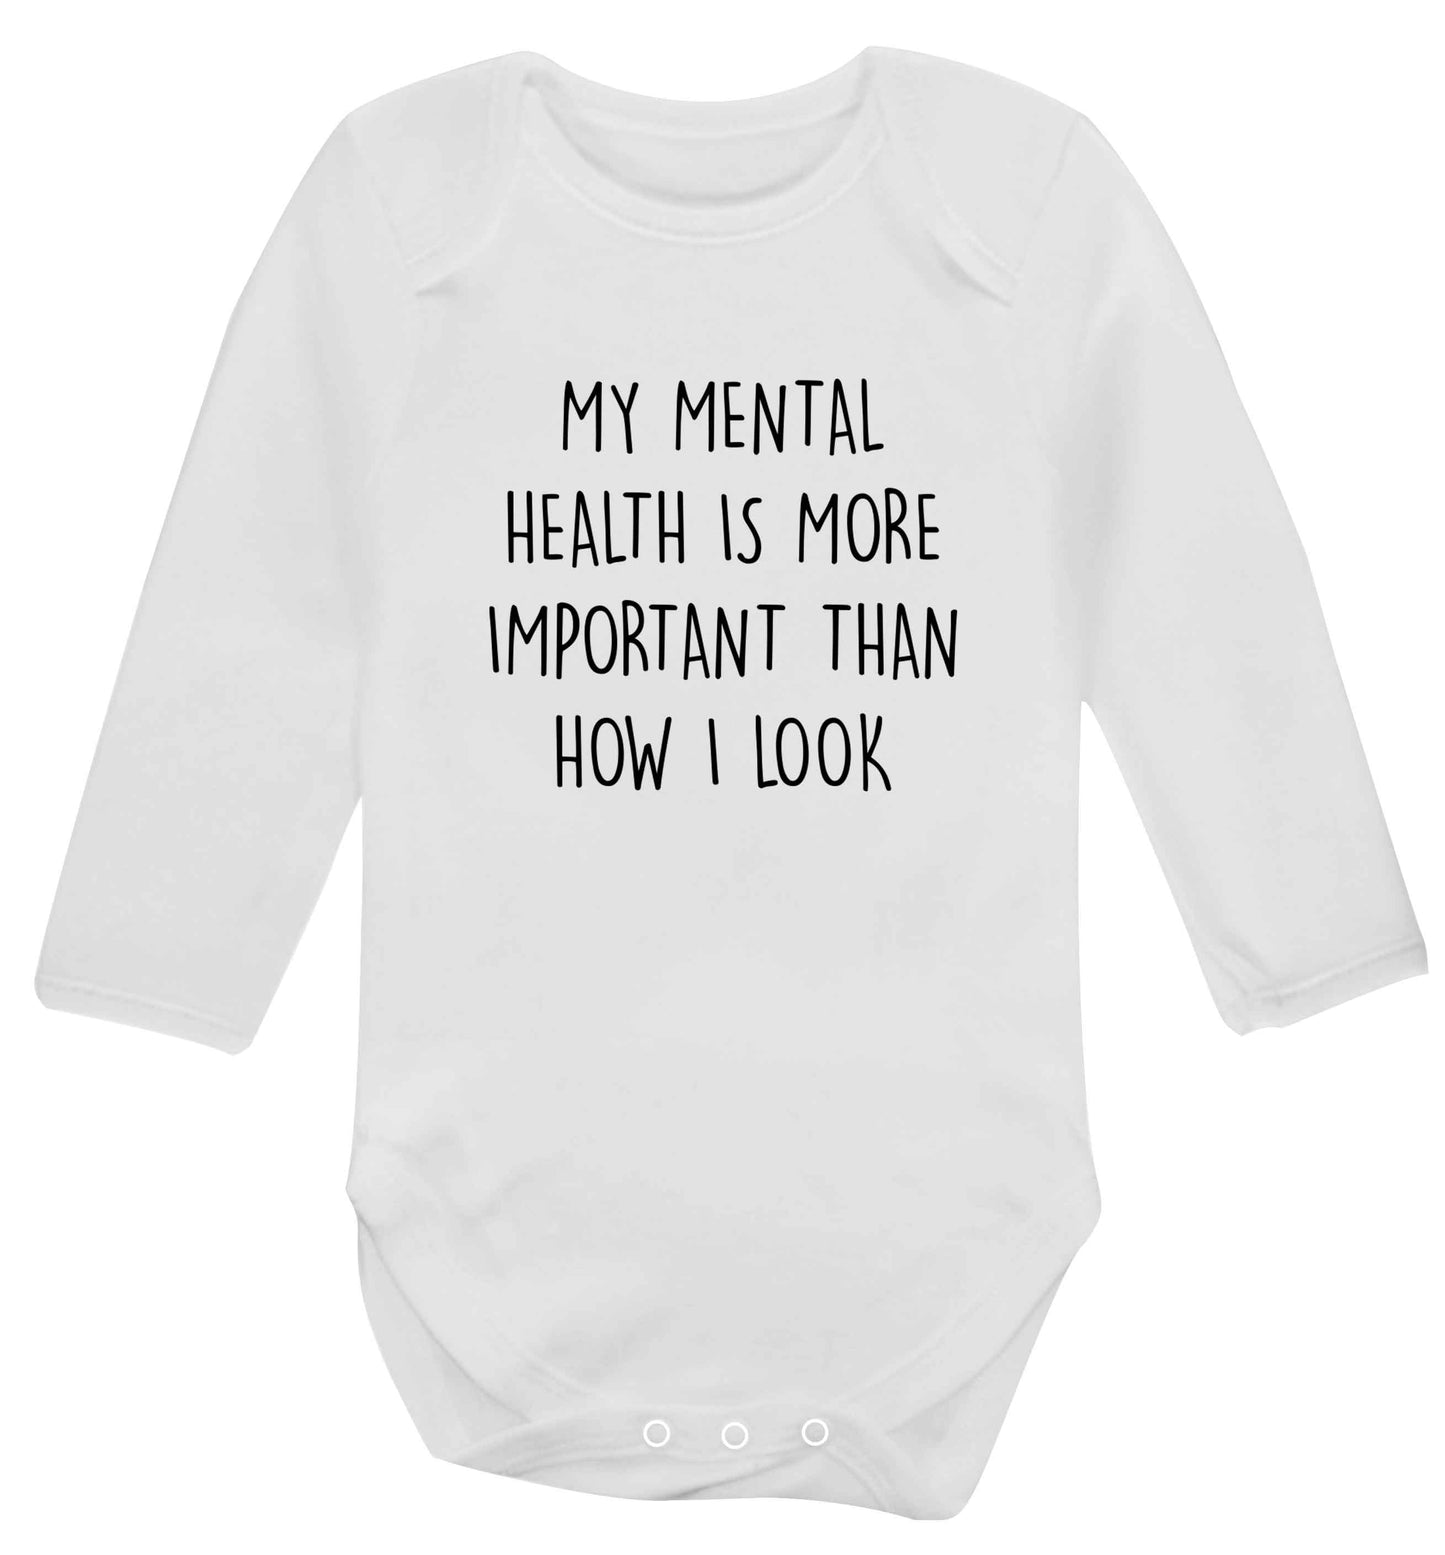 My mental health is more importnat than how I look baby vest long sleeved white 6-12 months